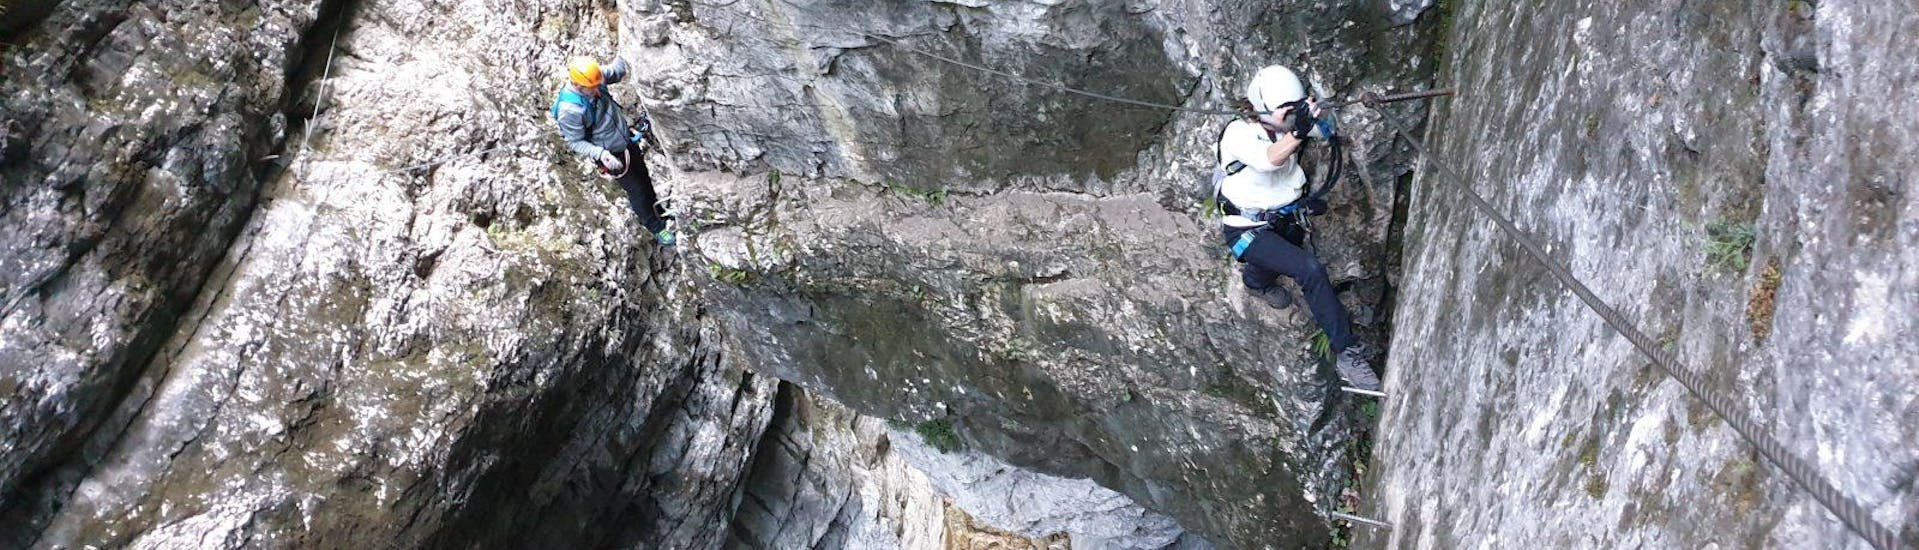 Two people climbing up the steep cliffs of "Gamsleckenwand" on their Via Ferrata Tour for Adventurers with the experienced instructor from Bergführer Salzburg.